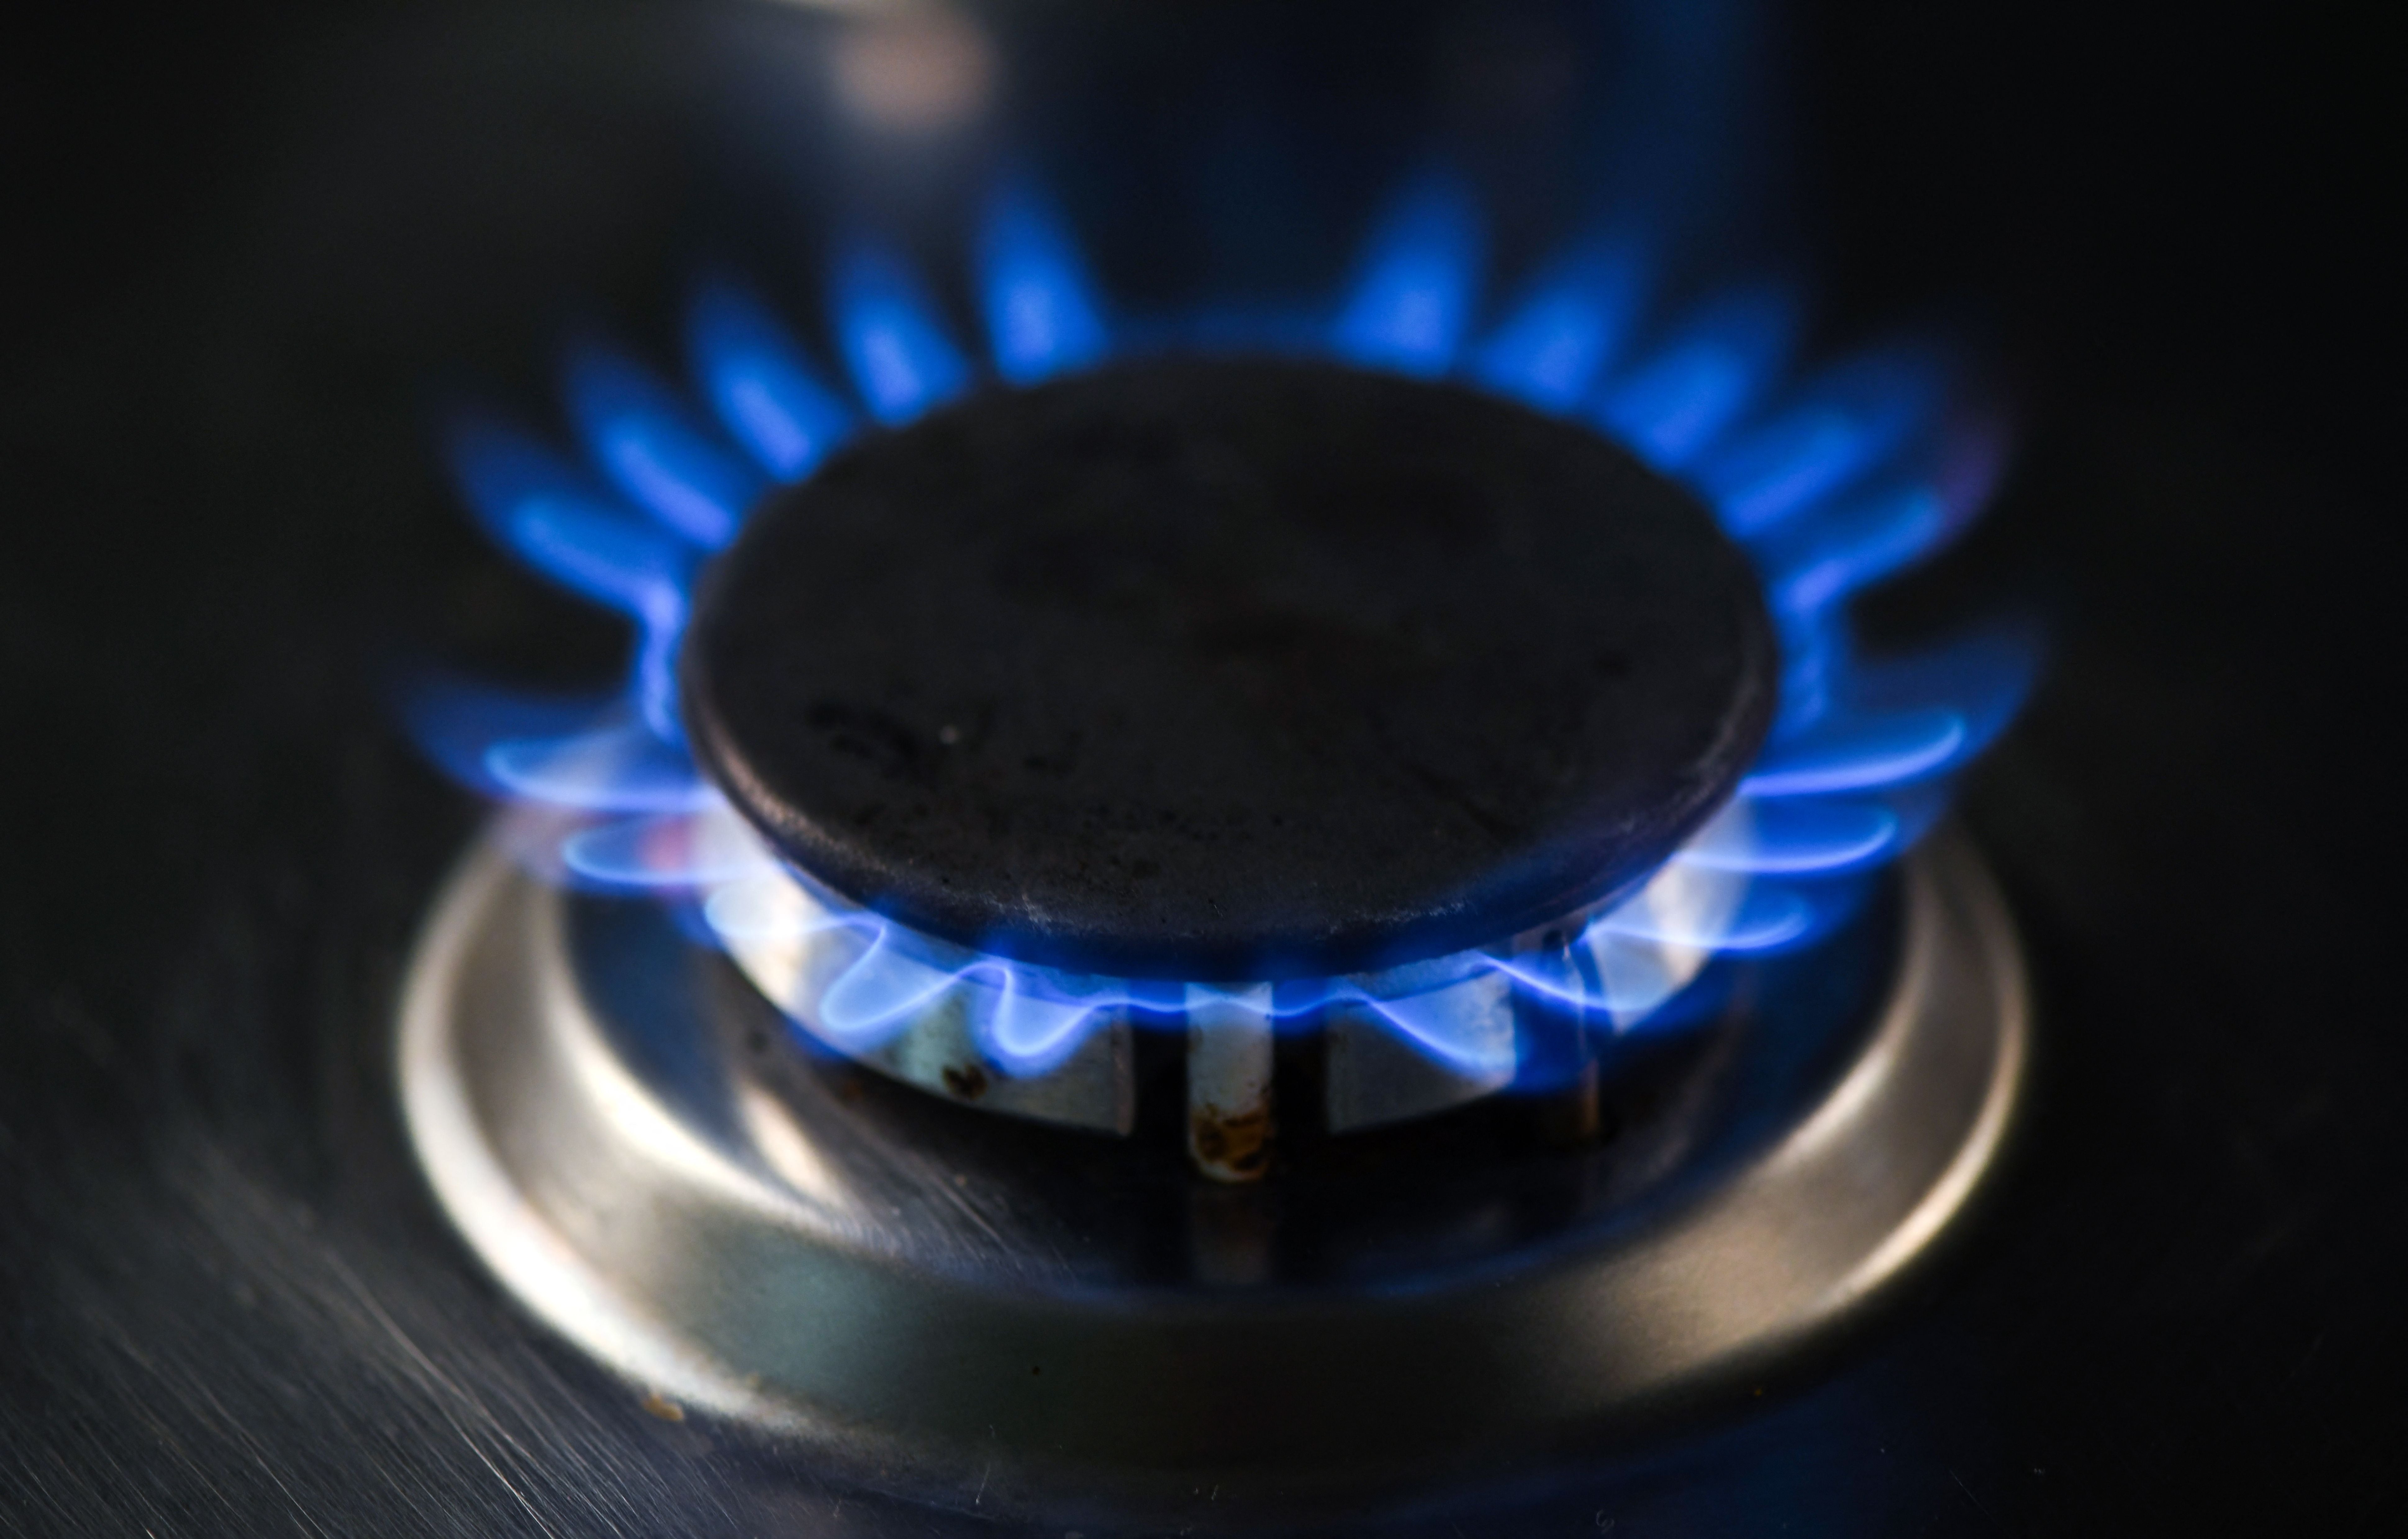 Prices running hot: The idea of a ‘social energy tariff’ is gaining traction